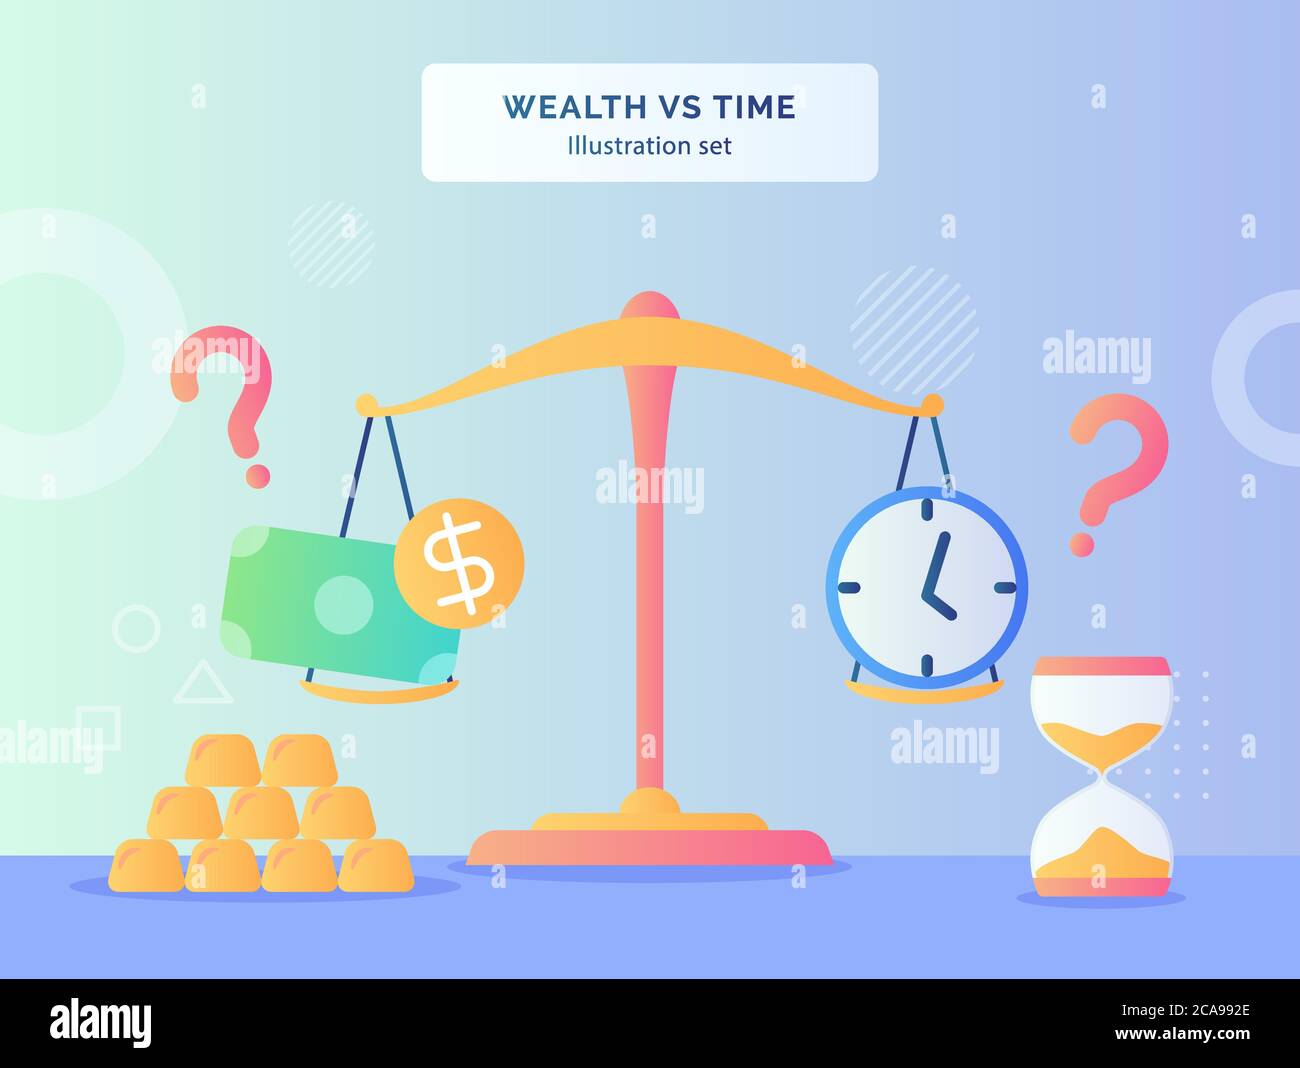 Wealth VS Time illustration set money dollar clock on scale background of gold hourglass with flat style. Stock Vector